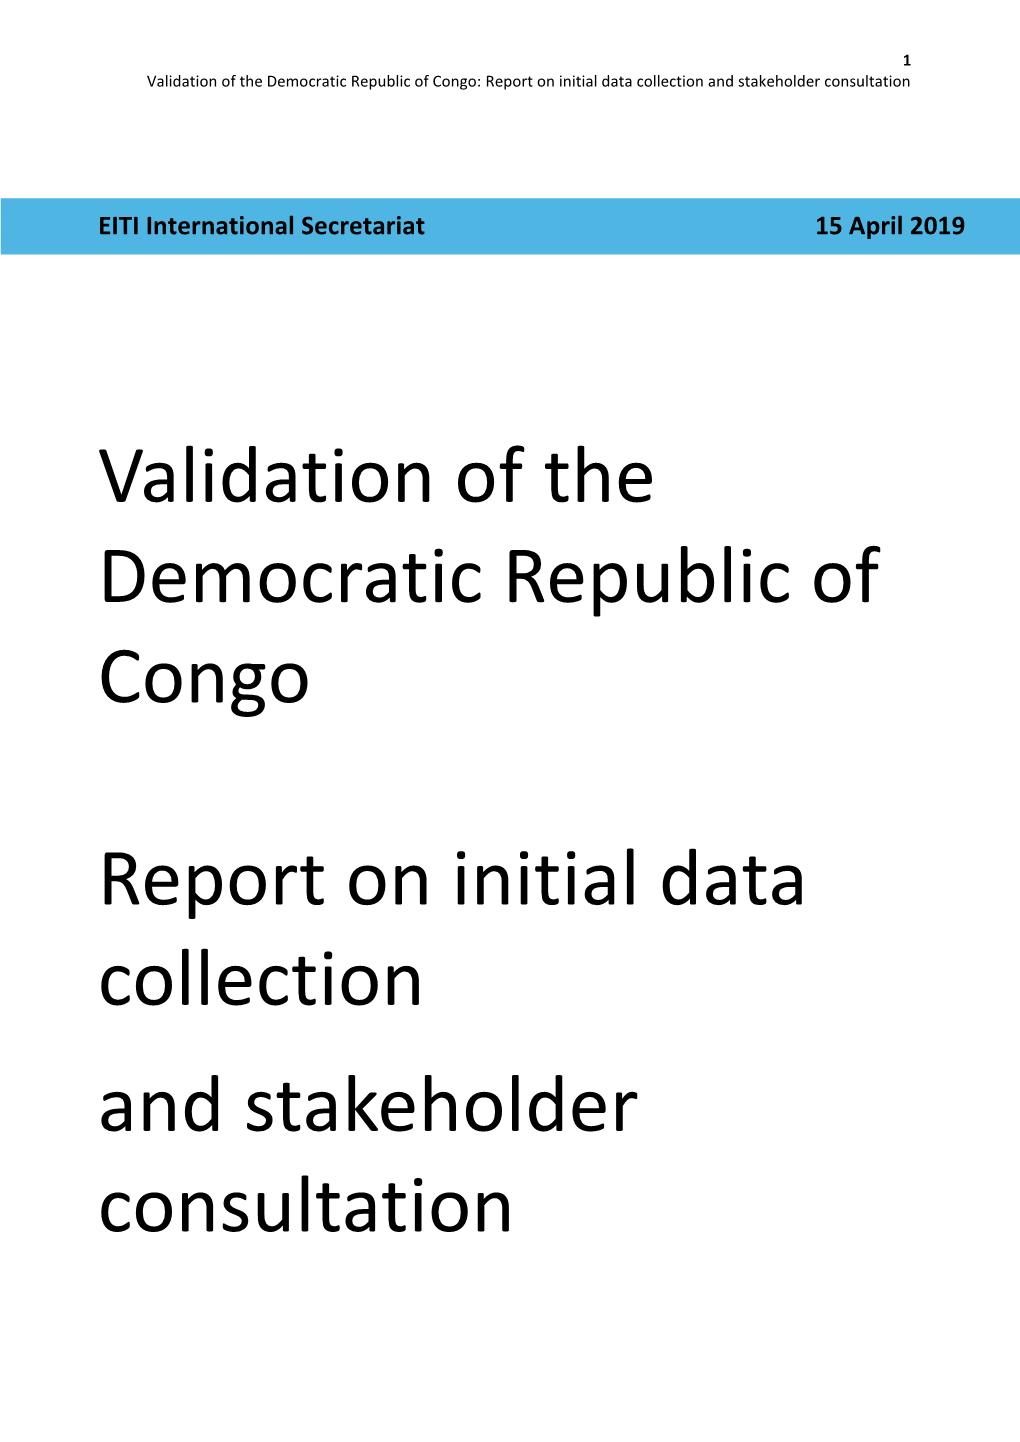 Validation of the Democratic Republic of Congo Report on Initial Data